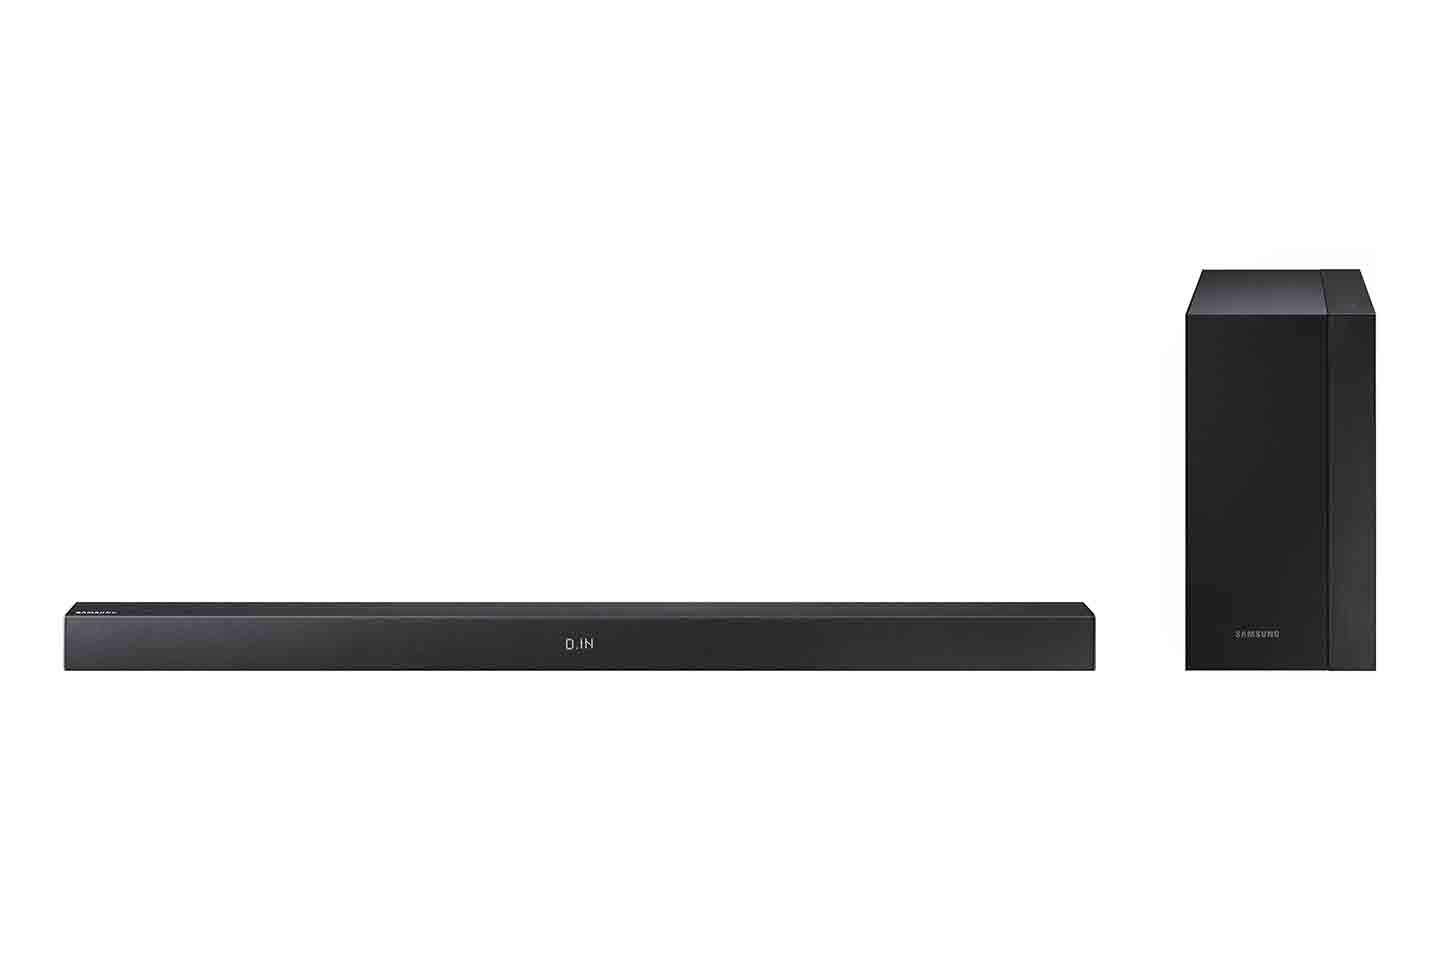 Op risico Boomgaard plaag 200W 2.1 Ch Soundbar with Wireless Subwoofer Home Theater - HW-M360/ZA |  Samsung US